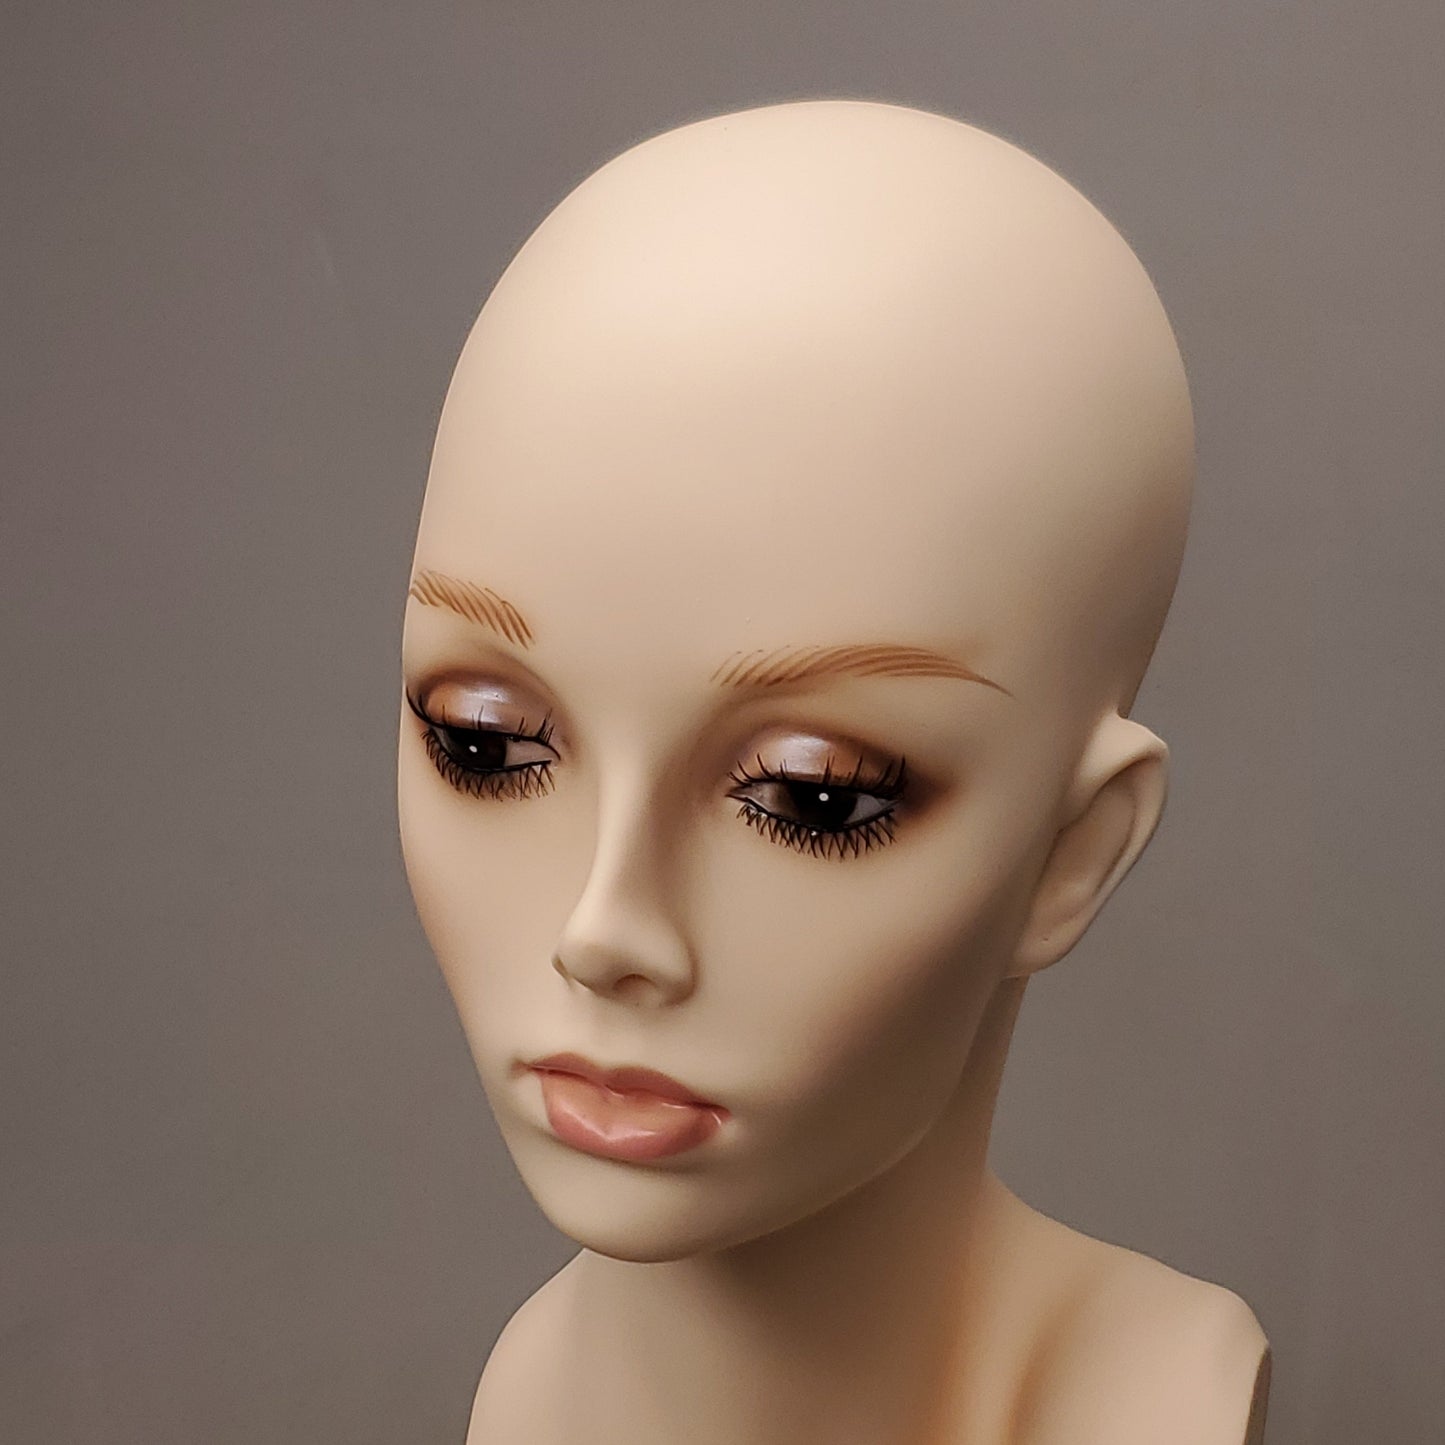 RENE of PARIS Flesh Mannequin Female Head 17" for Wig Styling 215133 (New)